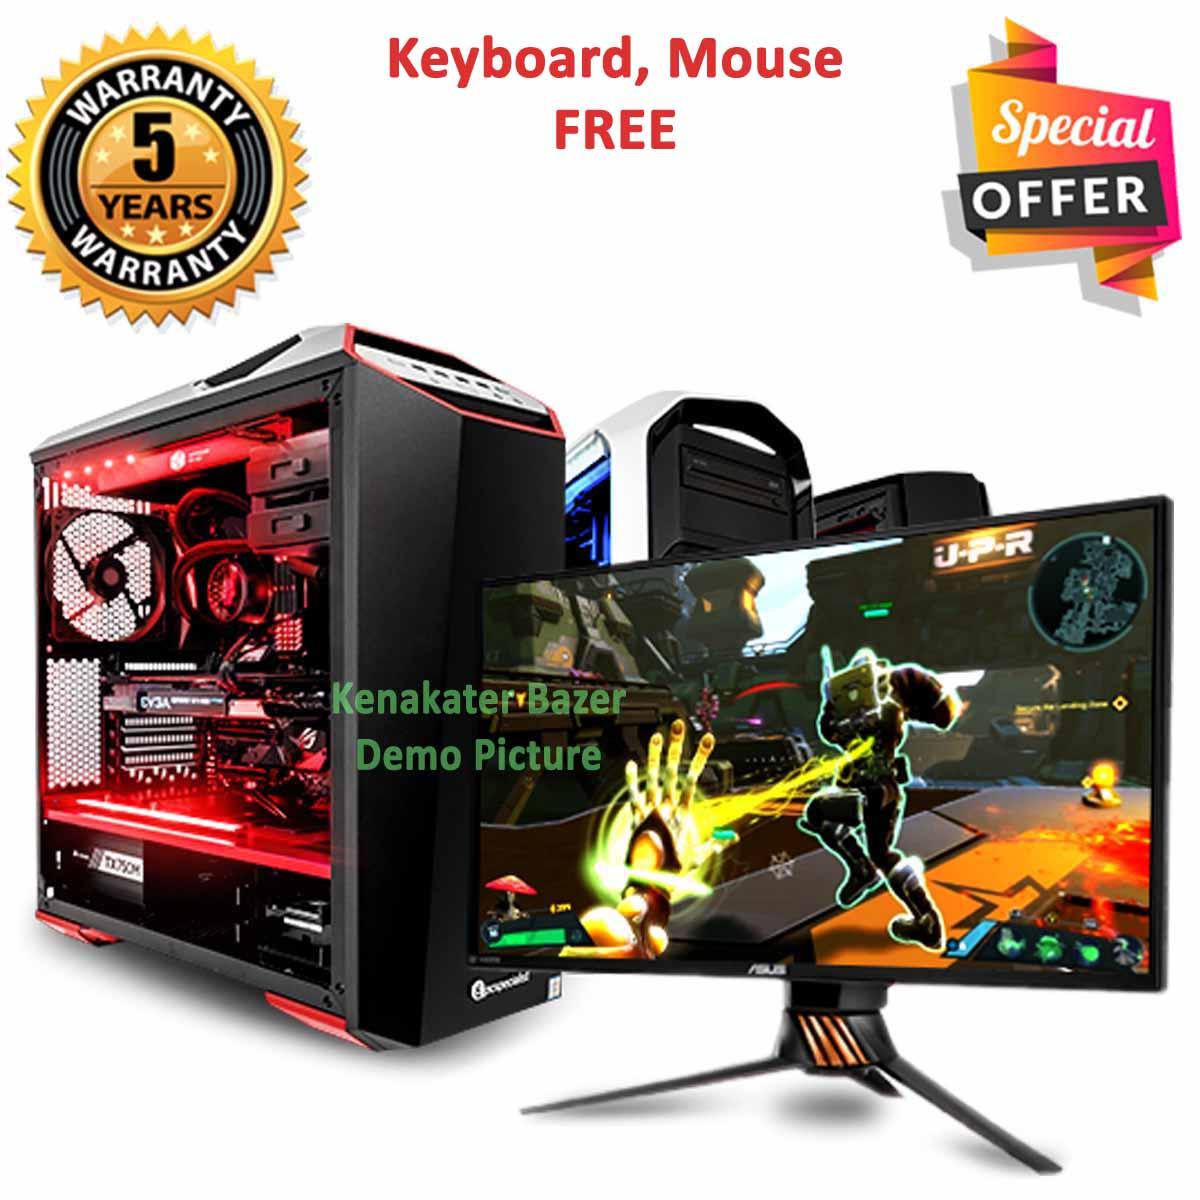 Intel Dual Core Ram 2gb Hdd 500gb Graphics 1gb Built In And Monitor 19 Gaming Pc Windows 10 64 Bit New Desktop Computer 21 Buy Online At Best Prices In Bangladesh Daraz Com